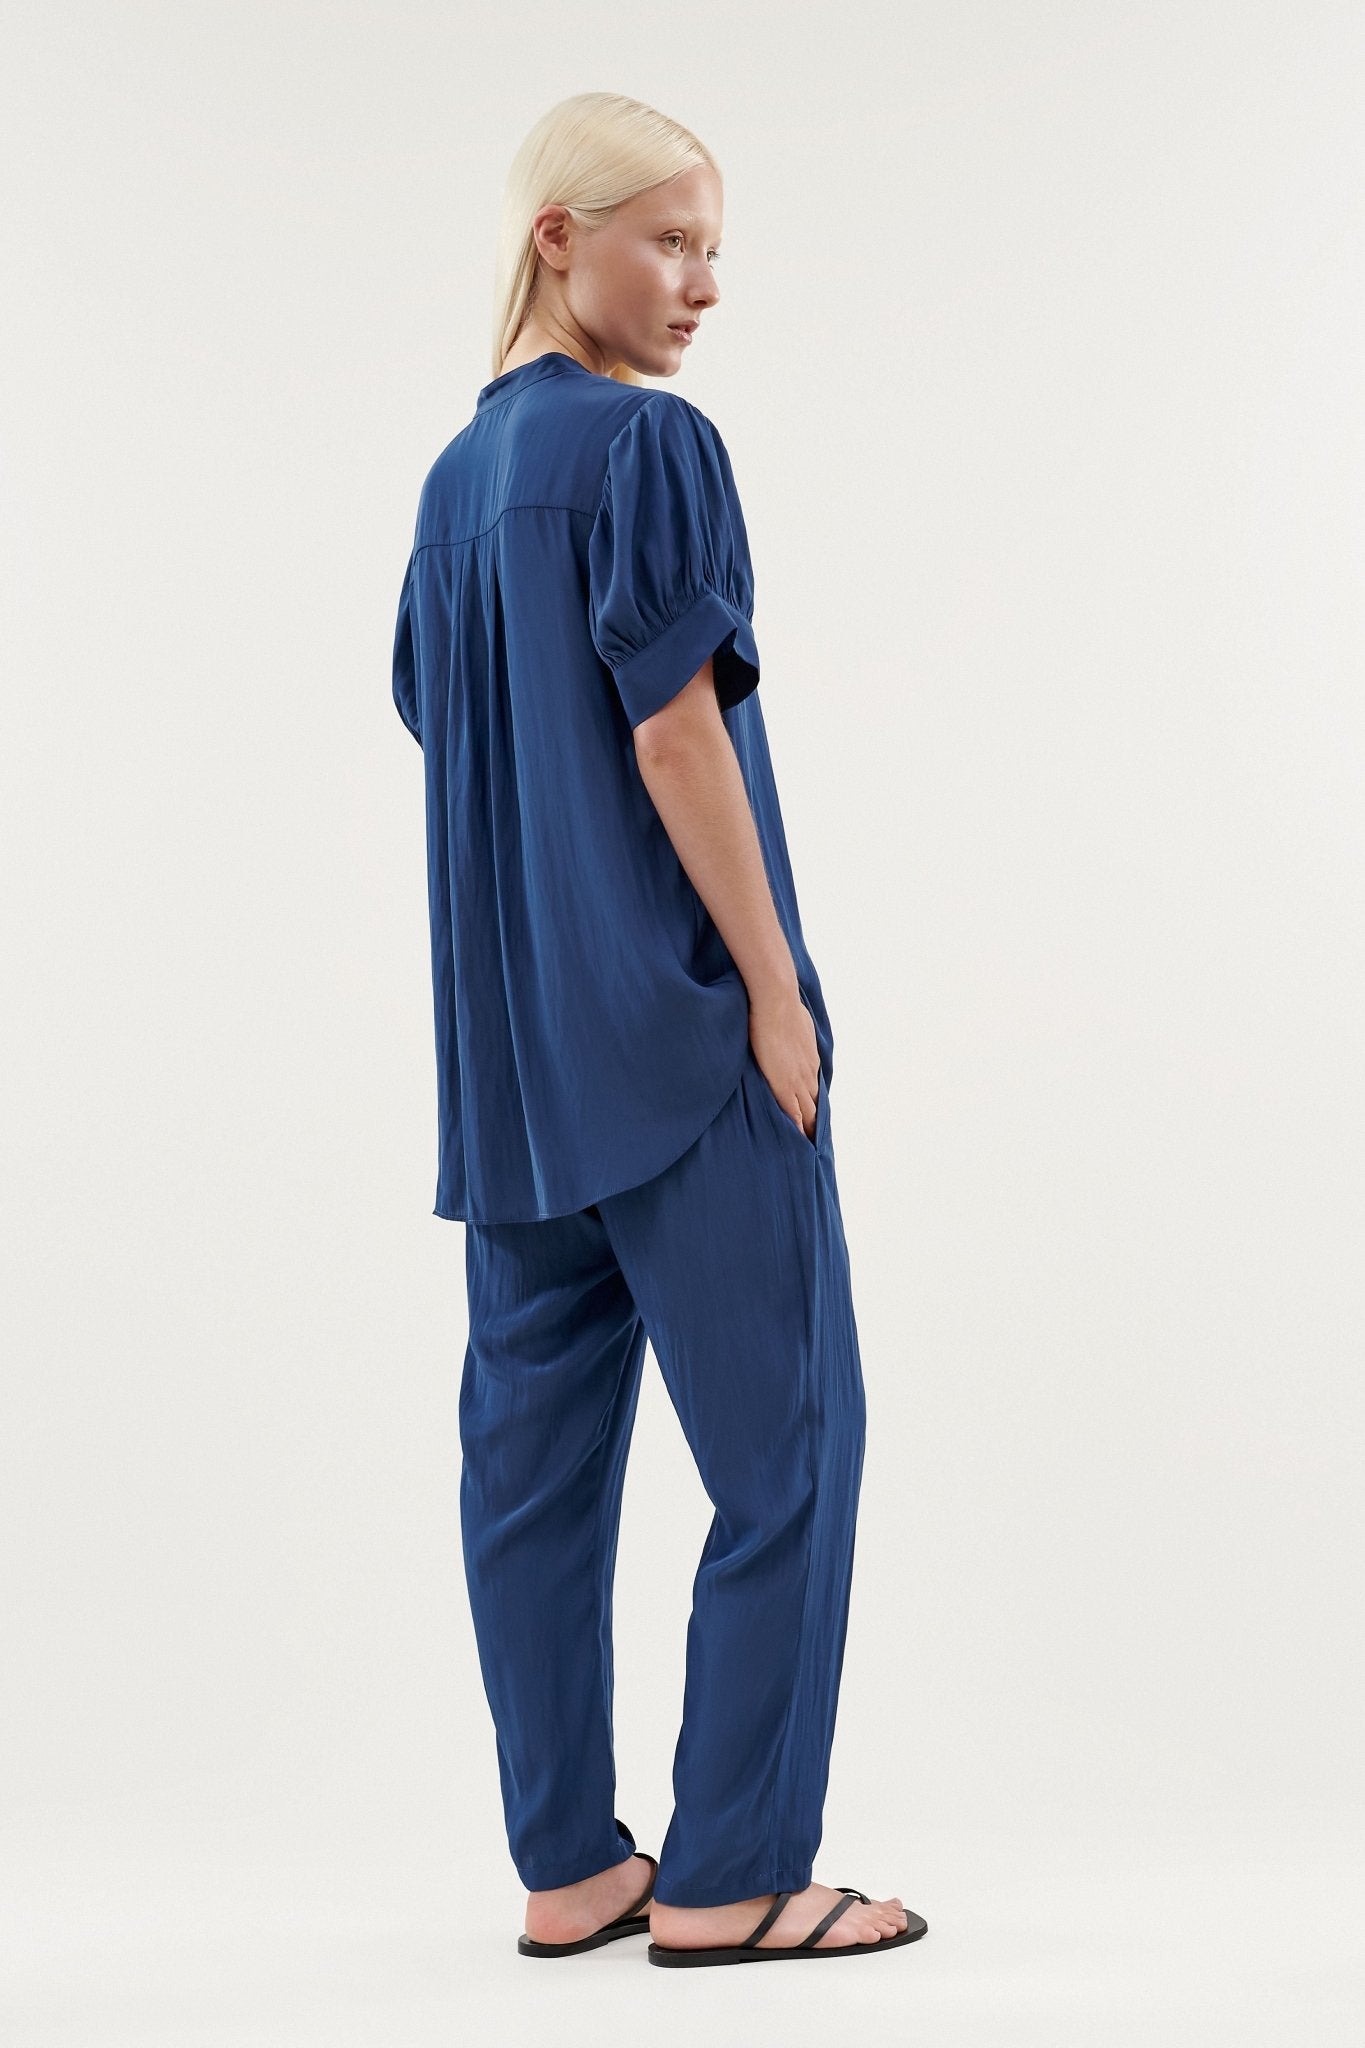 Shop Ena Pant in Ink Blue by Layer’d - Layer'd